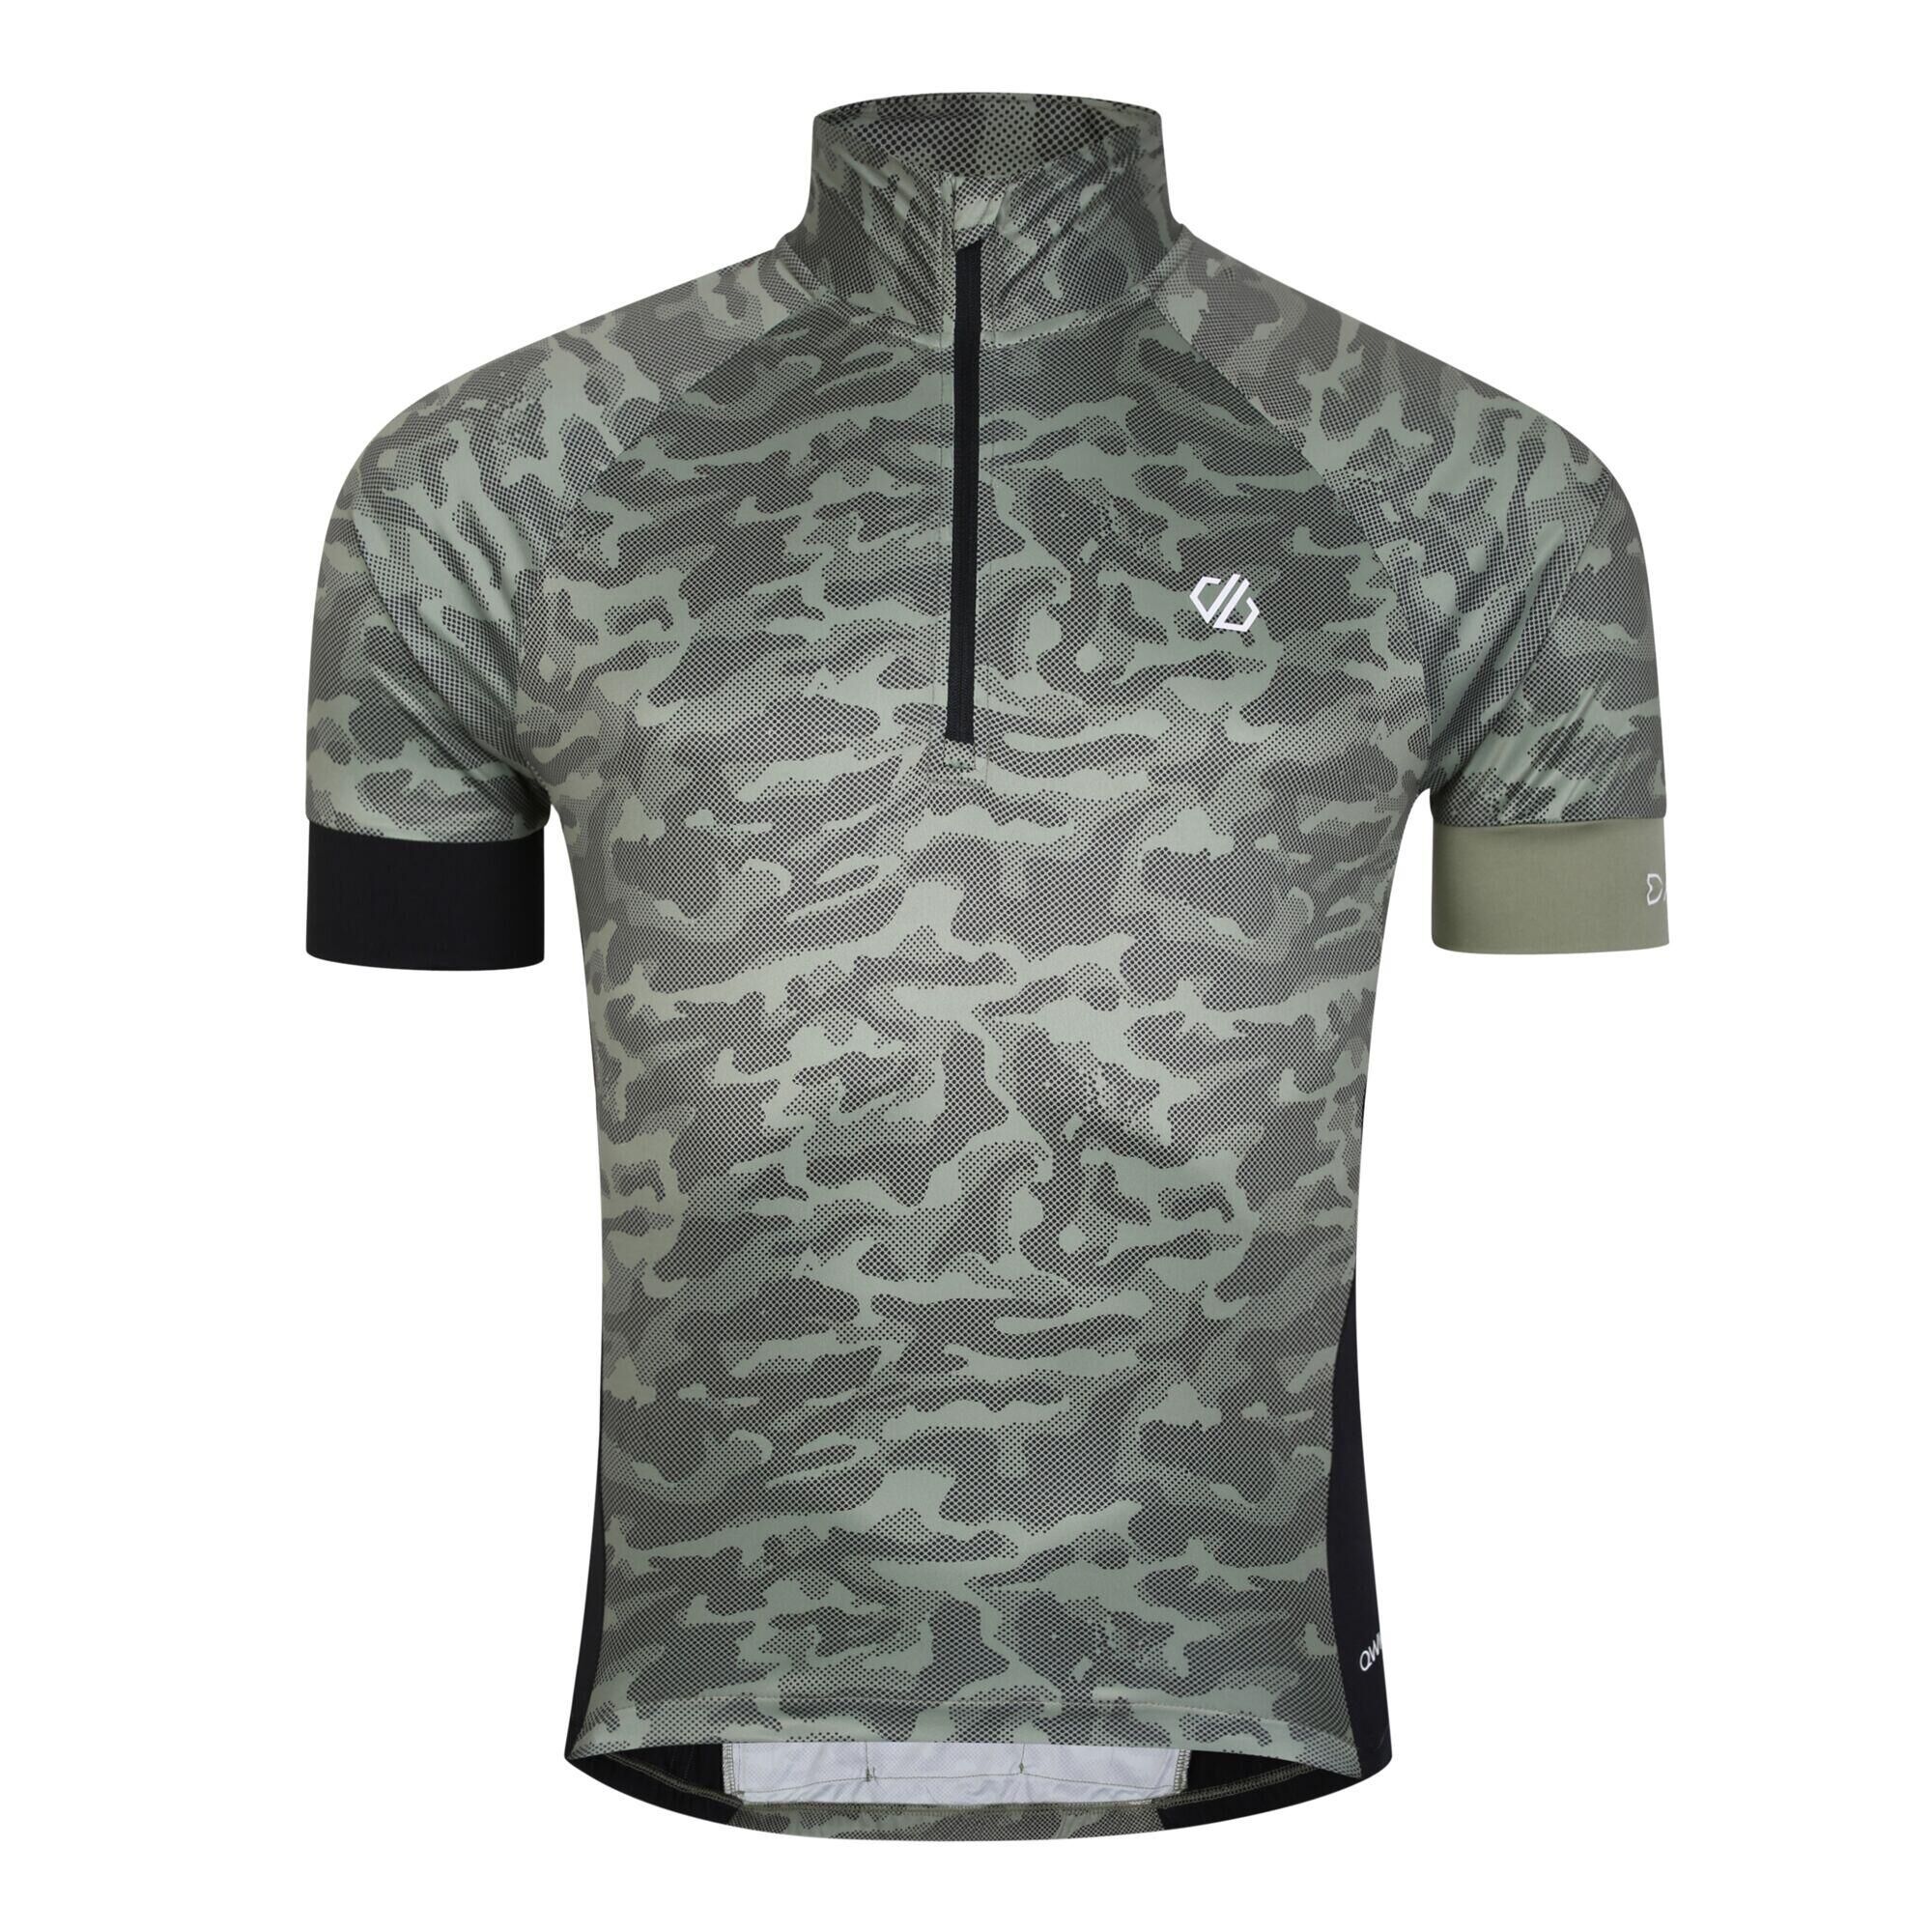 DARE 2B Stay the Course III Men's Cycling Half-Zip, Short Sleeve Jersey